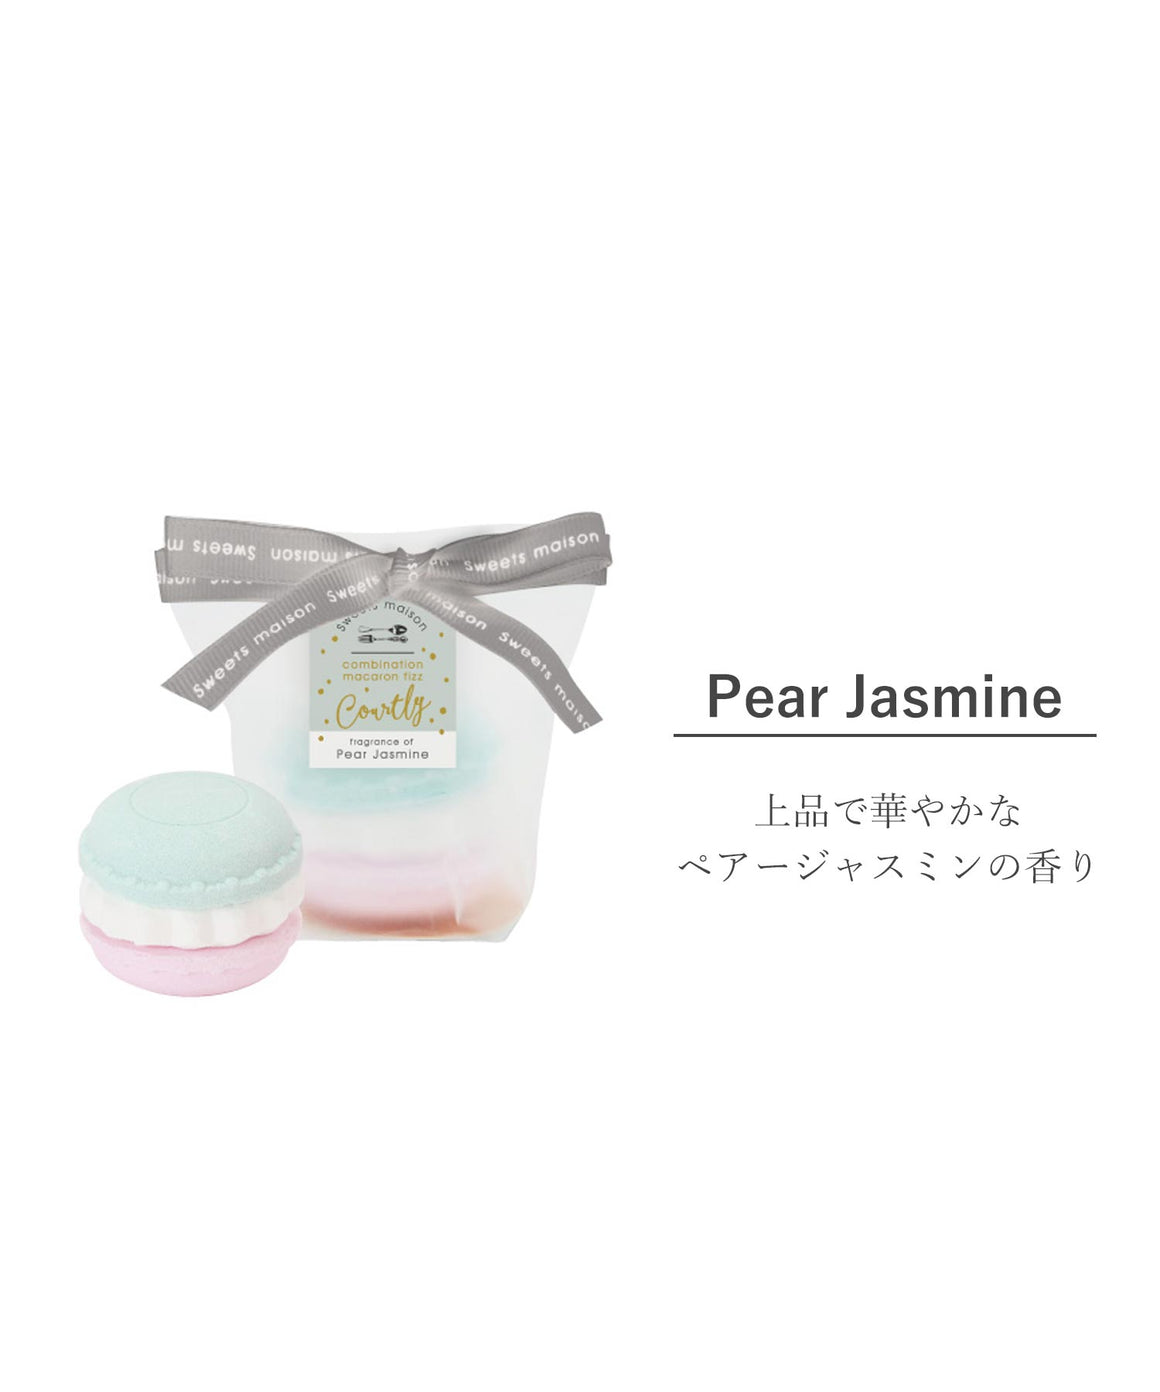 SWEETS MAISON Combination Macaron Fizz Courtly 1P Pear Jasmine  (50g)